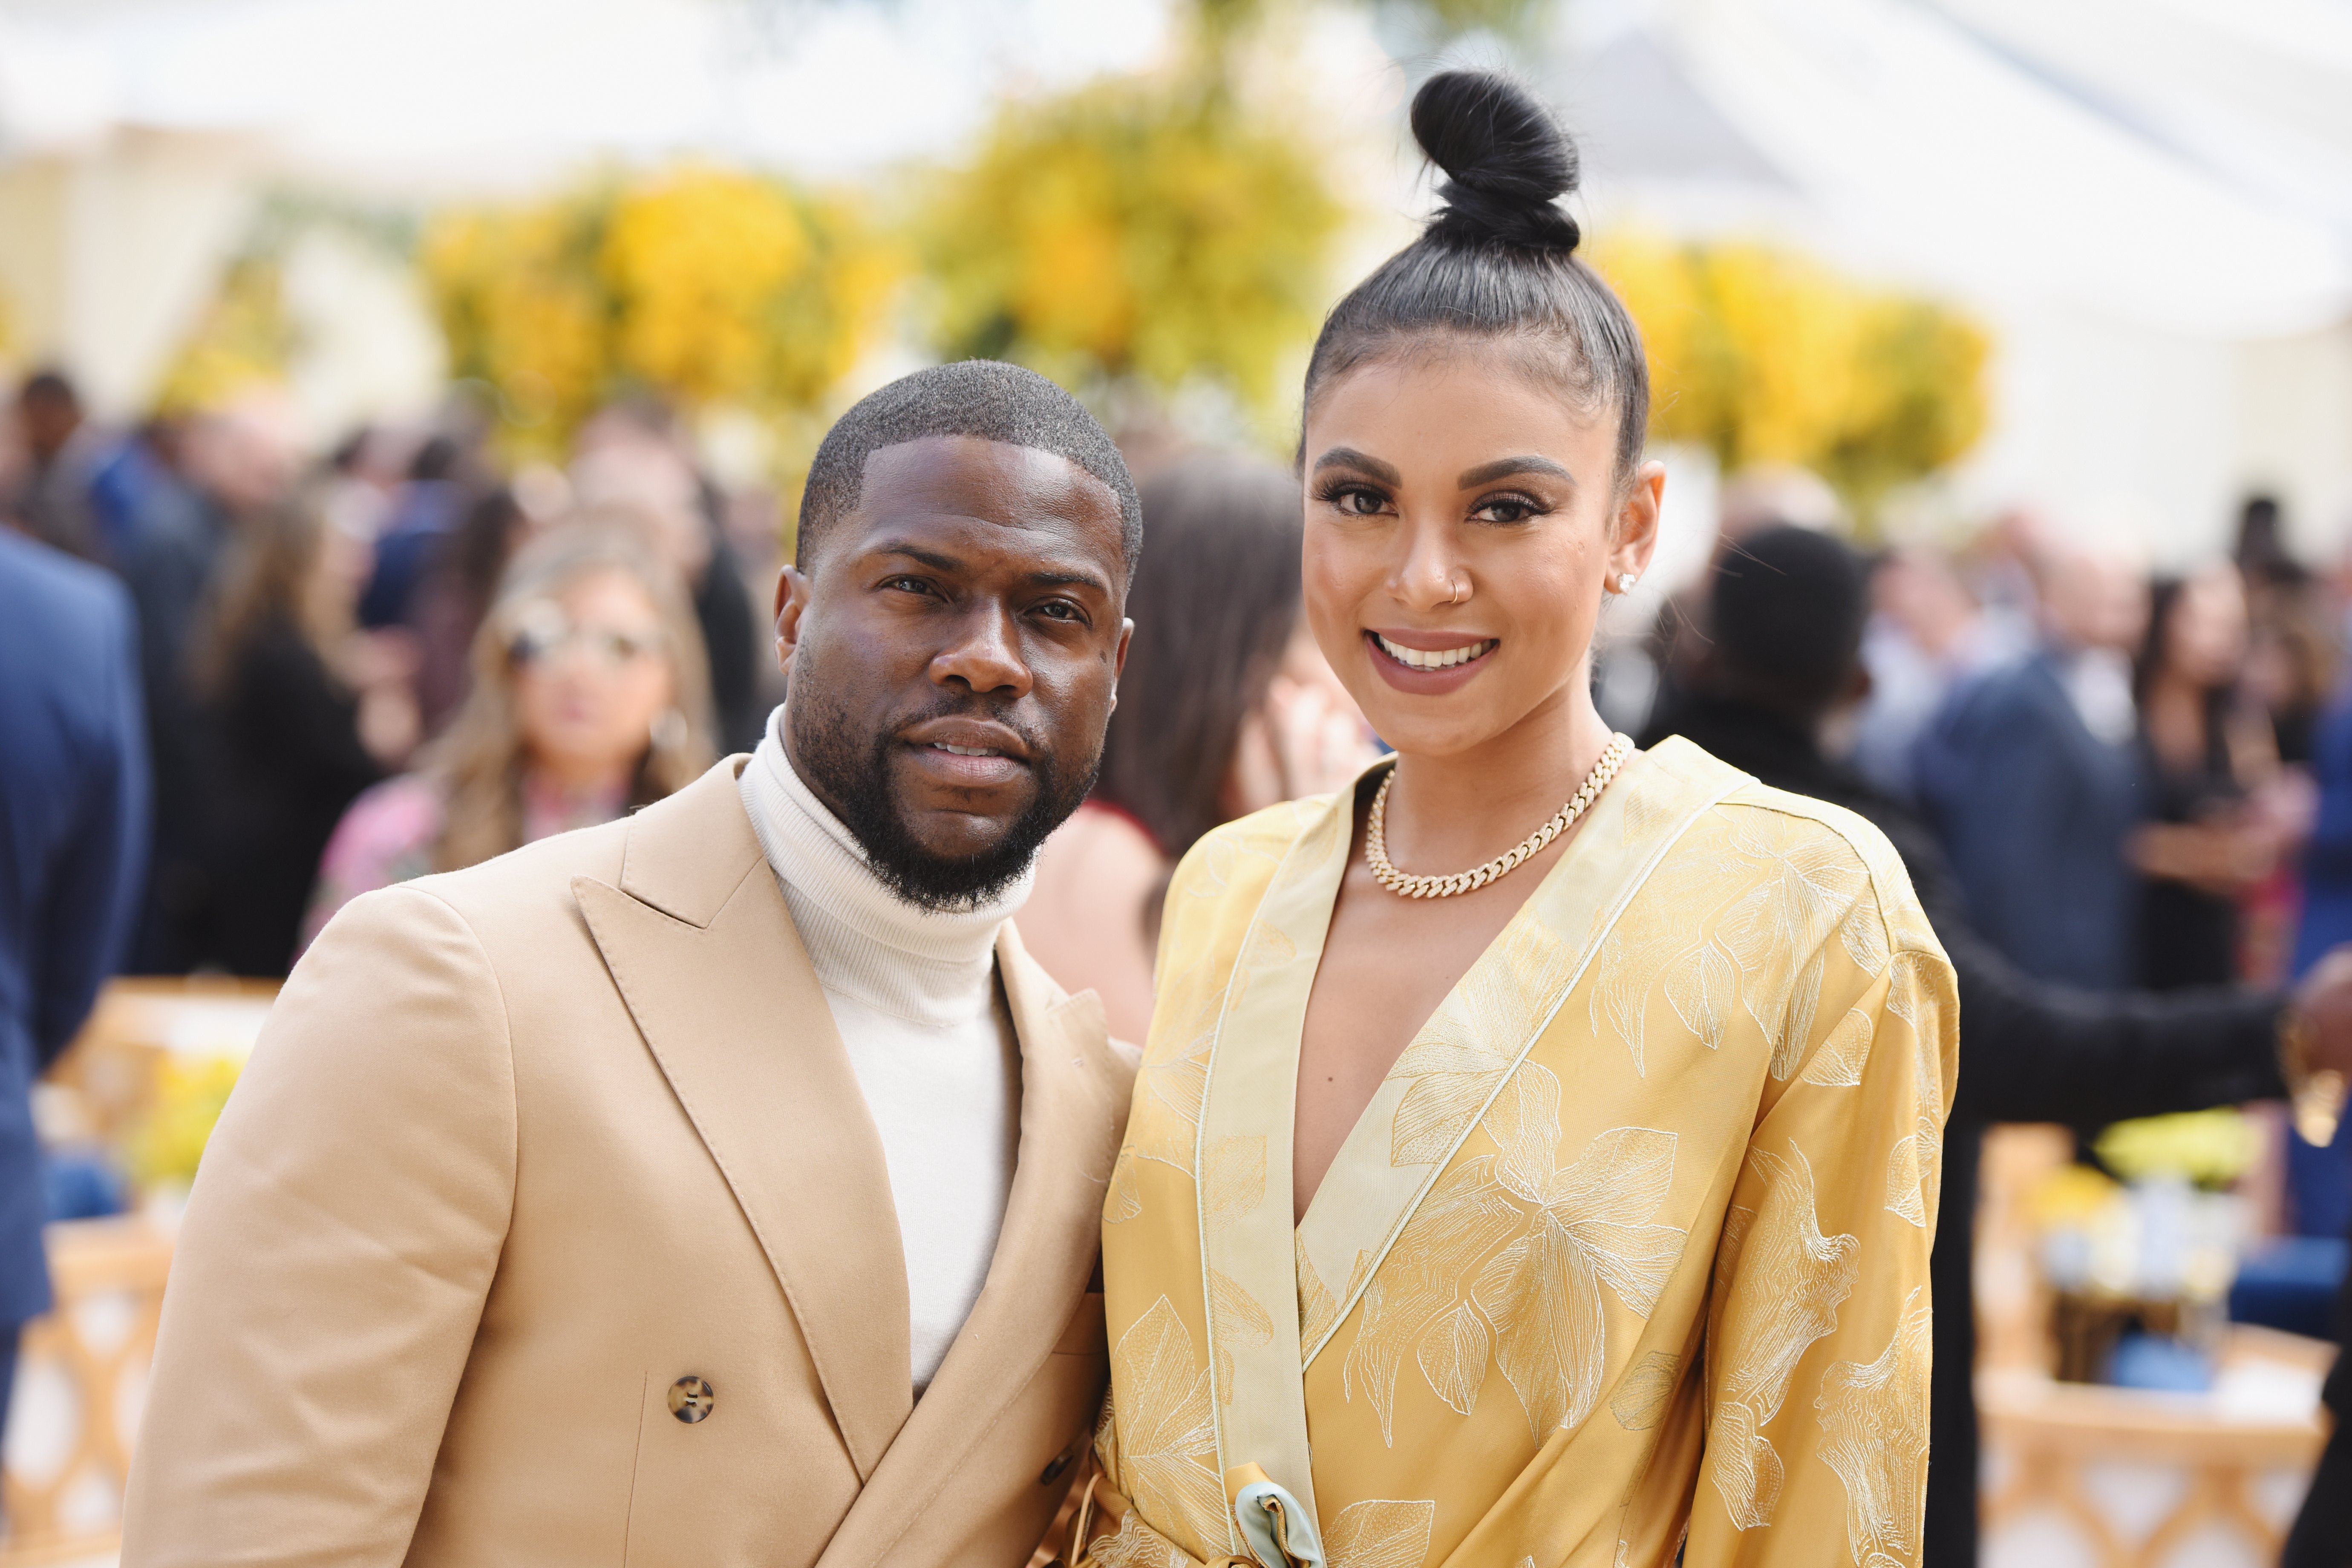 Kevin Hart and Eniko Parrish at the 2019 Roc Nation’s “THE BRUNCH” on February 9, 2019 in Los Angeles, California. | Source: Getty Images